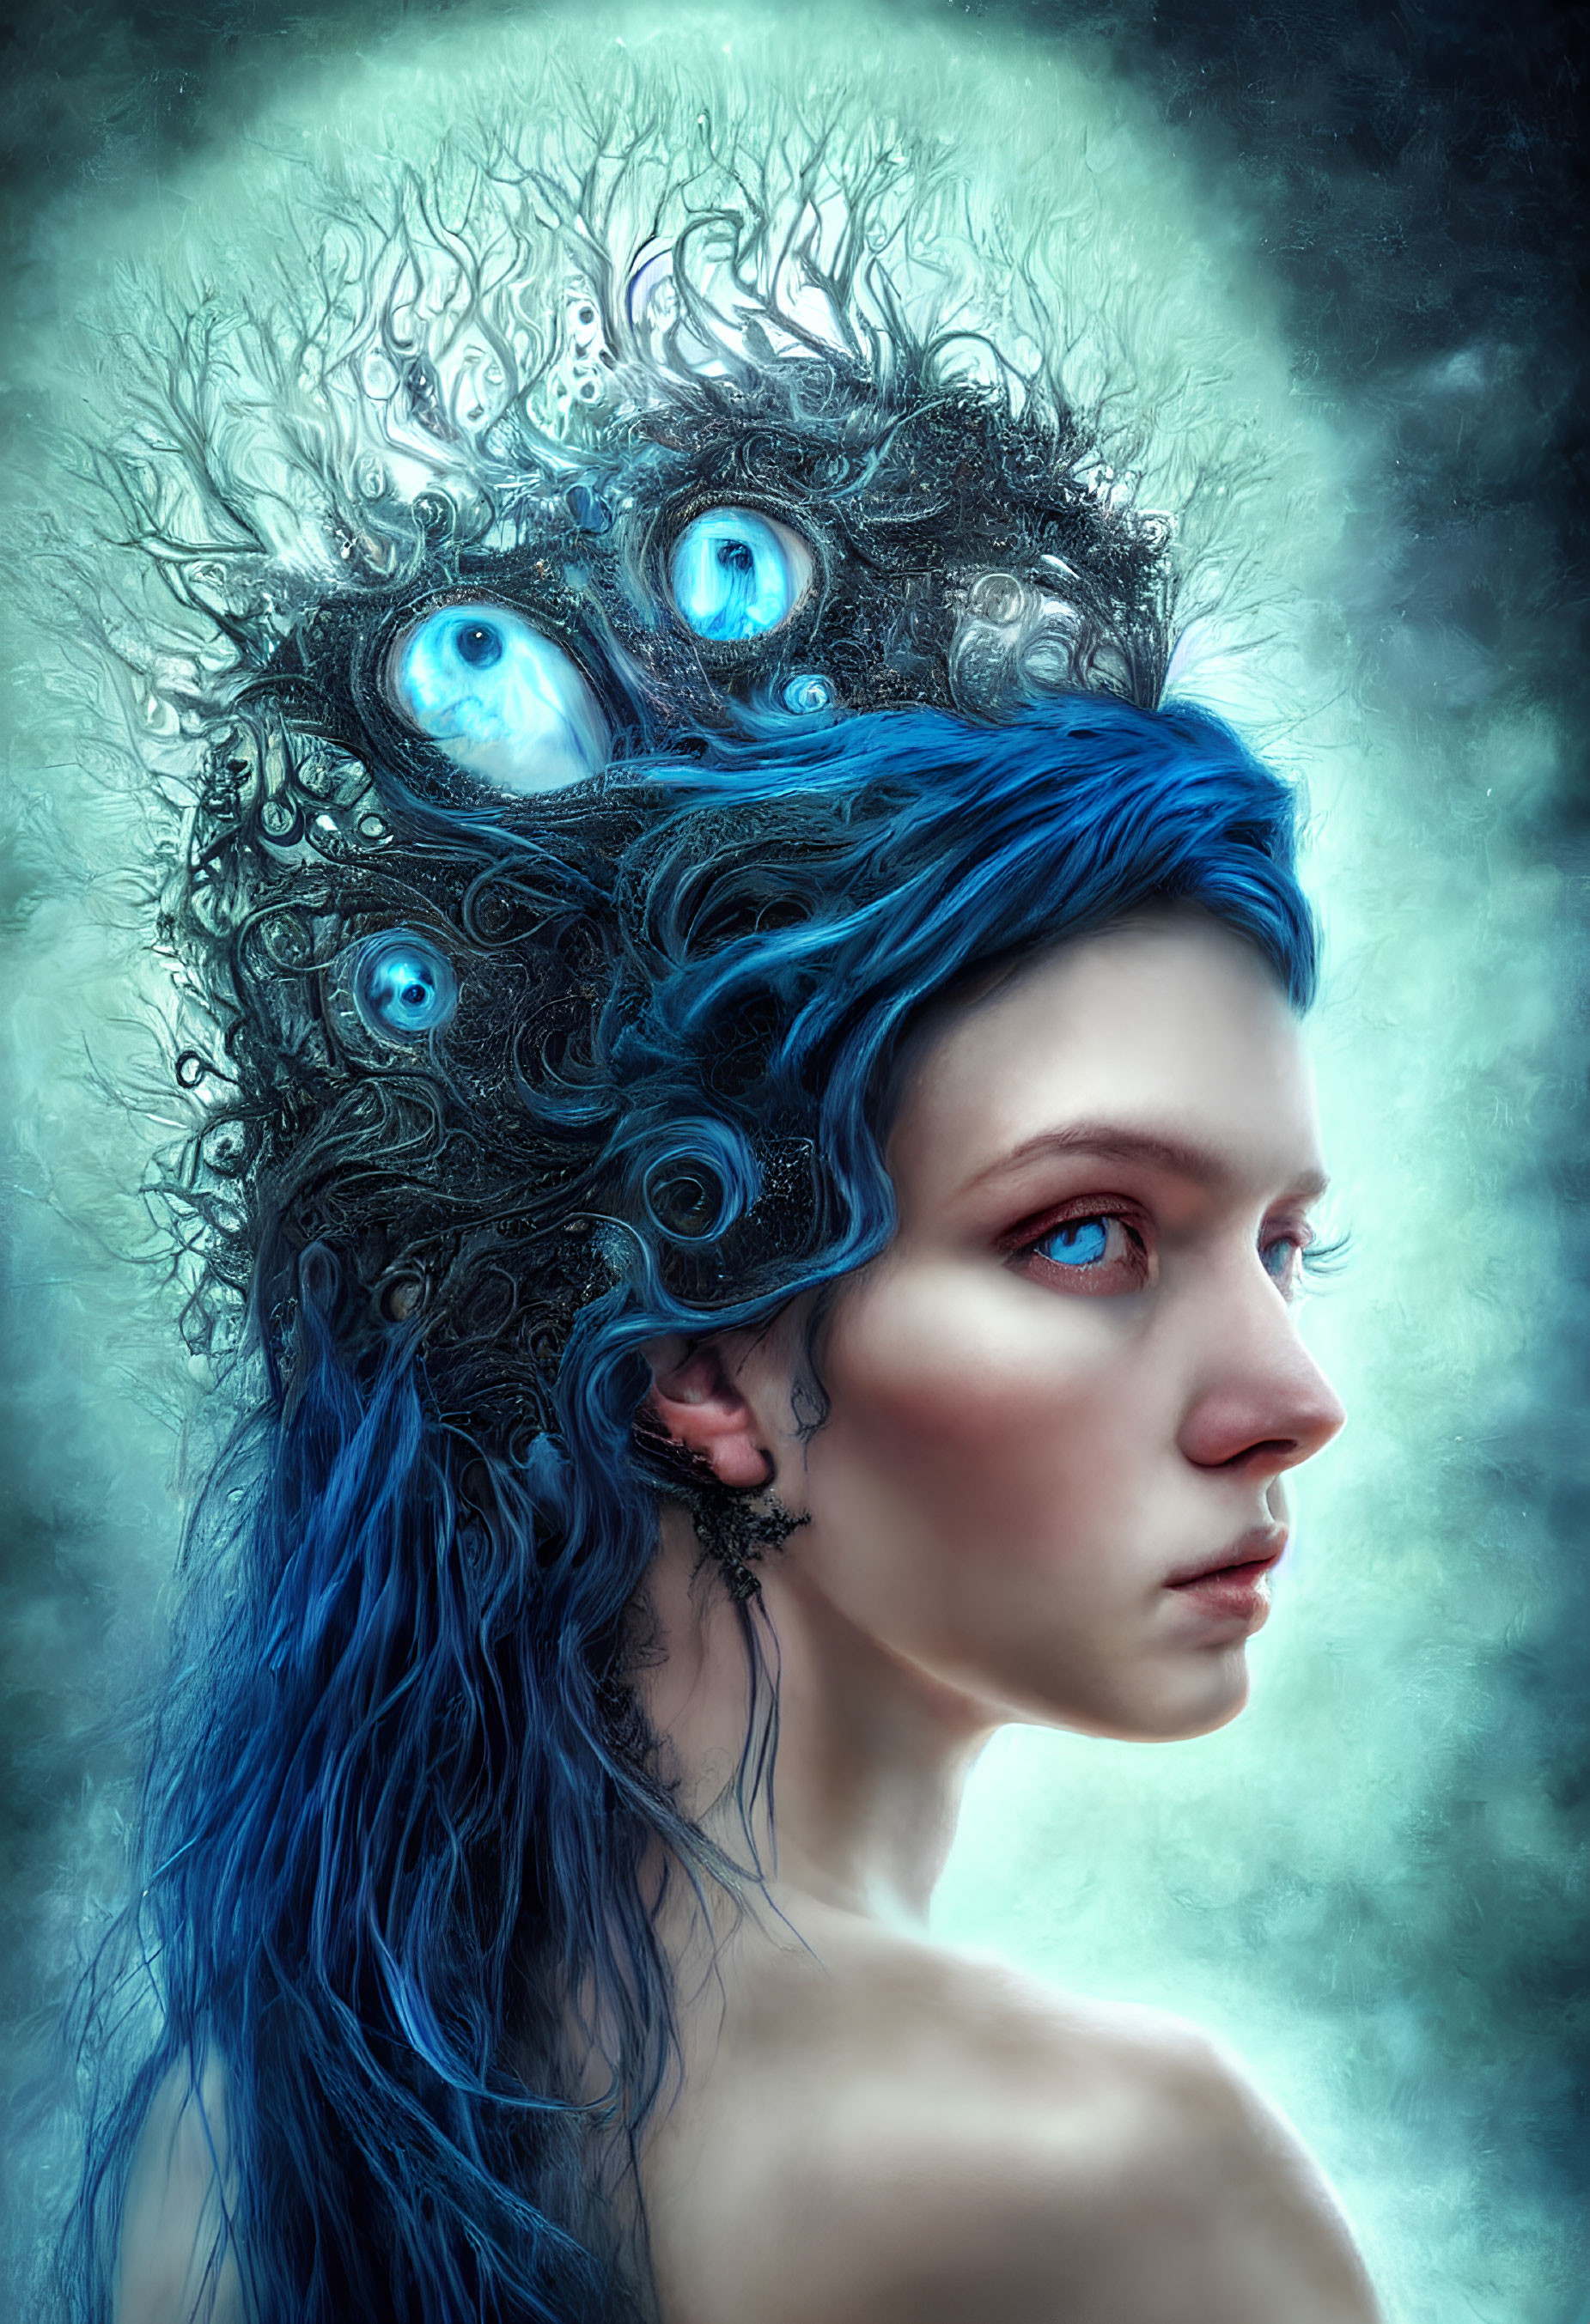 Vibrant blue hair and luminous eyes in surreal portrait